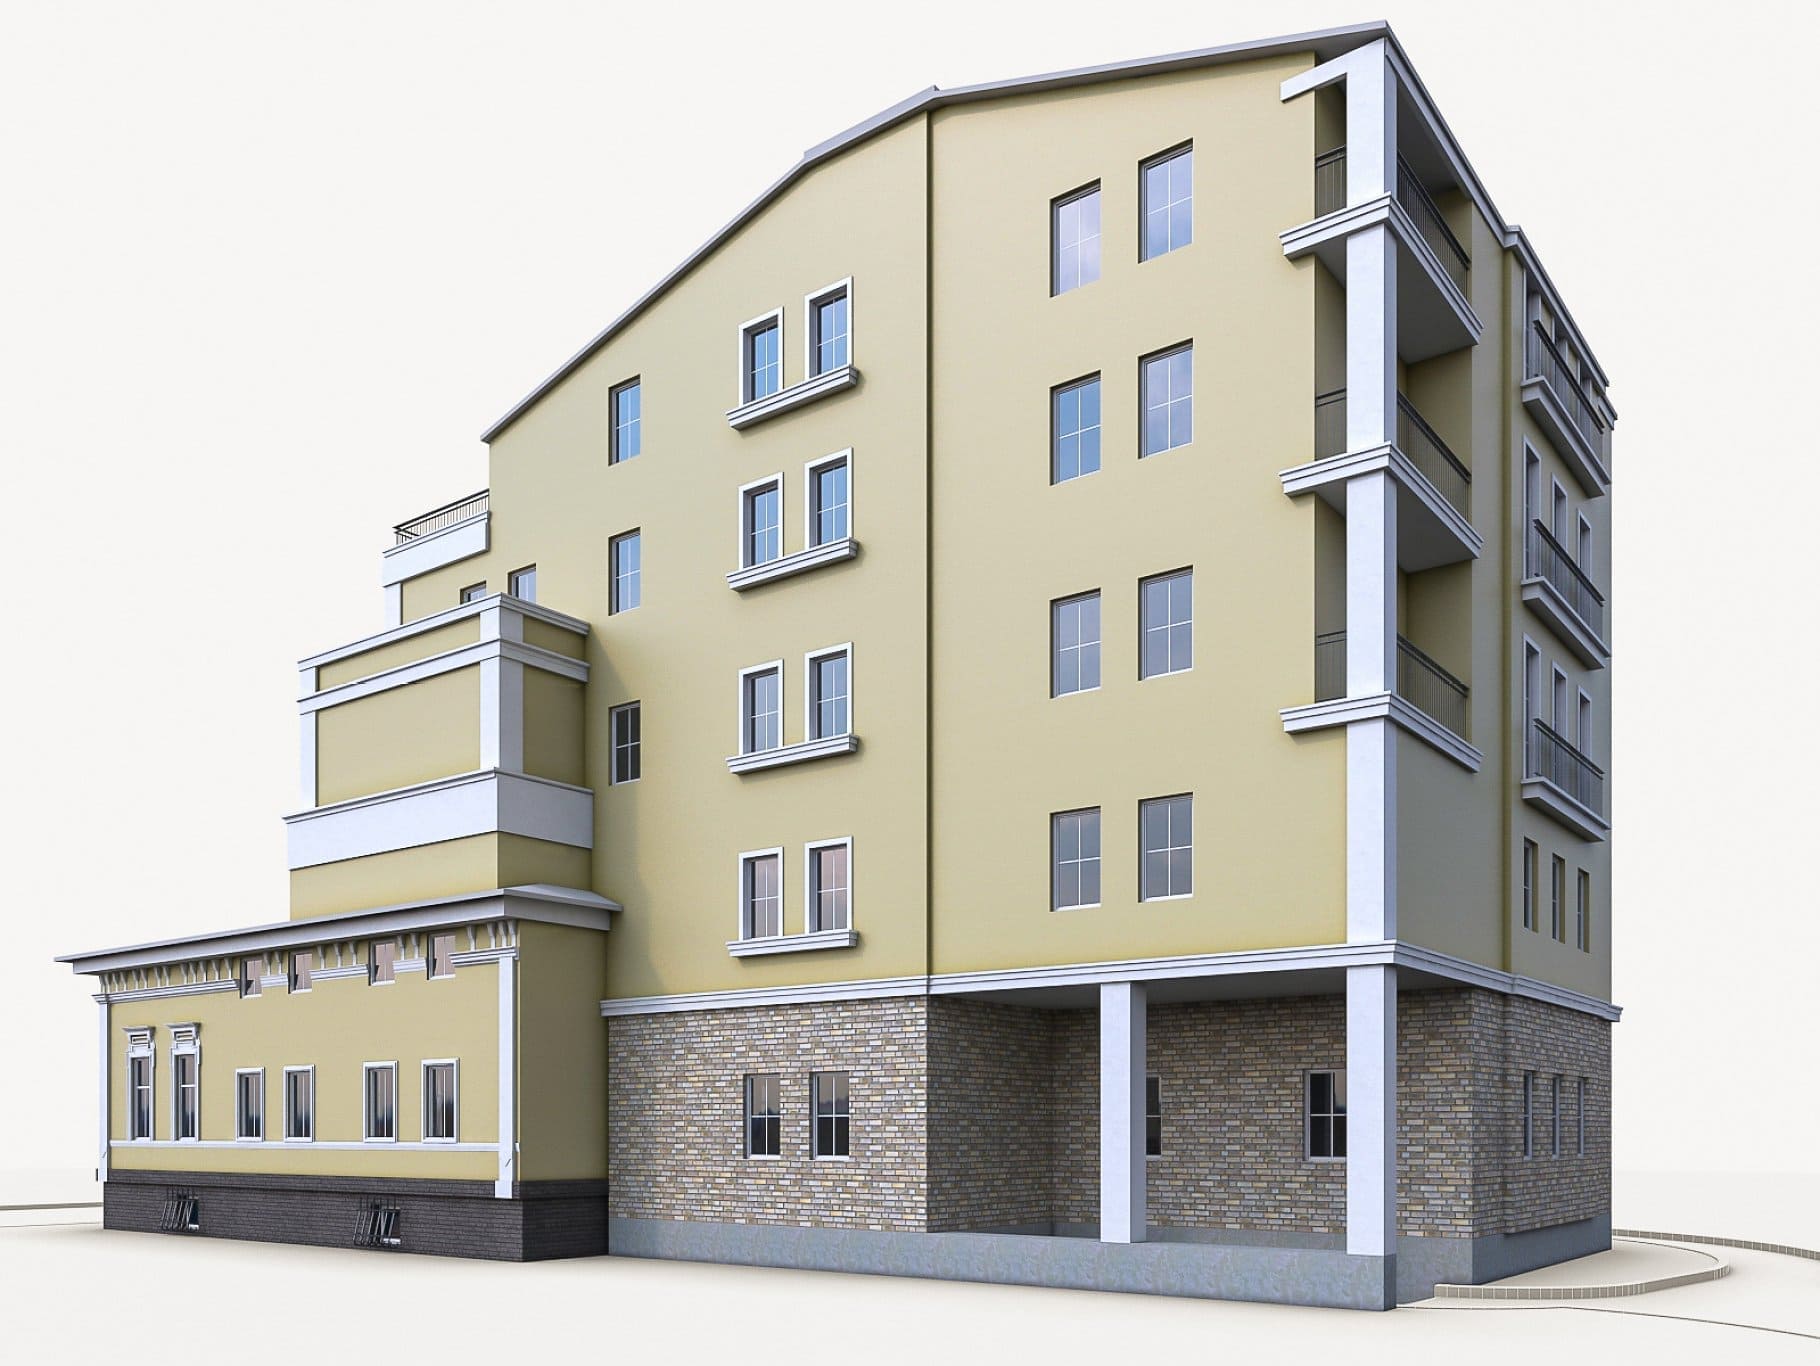 Five-story residential condominium with an extension.